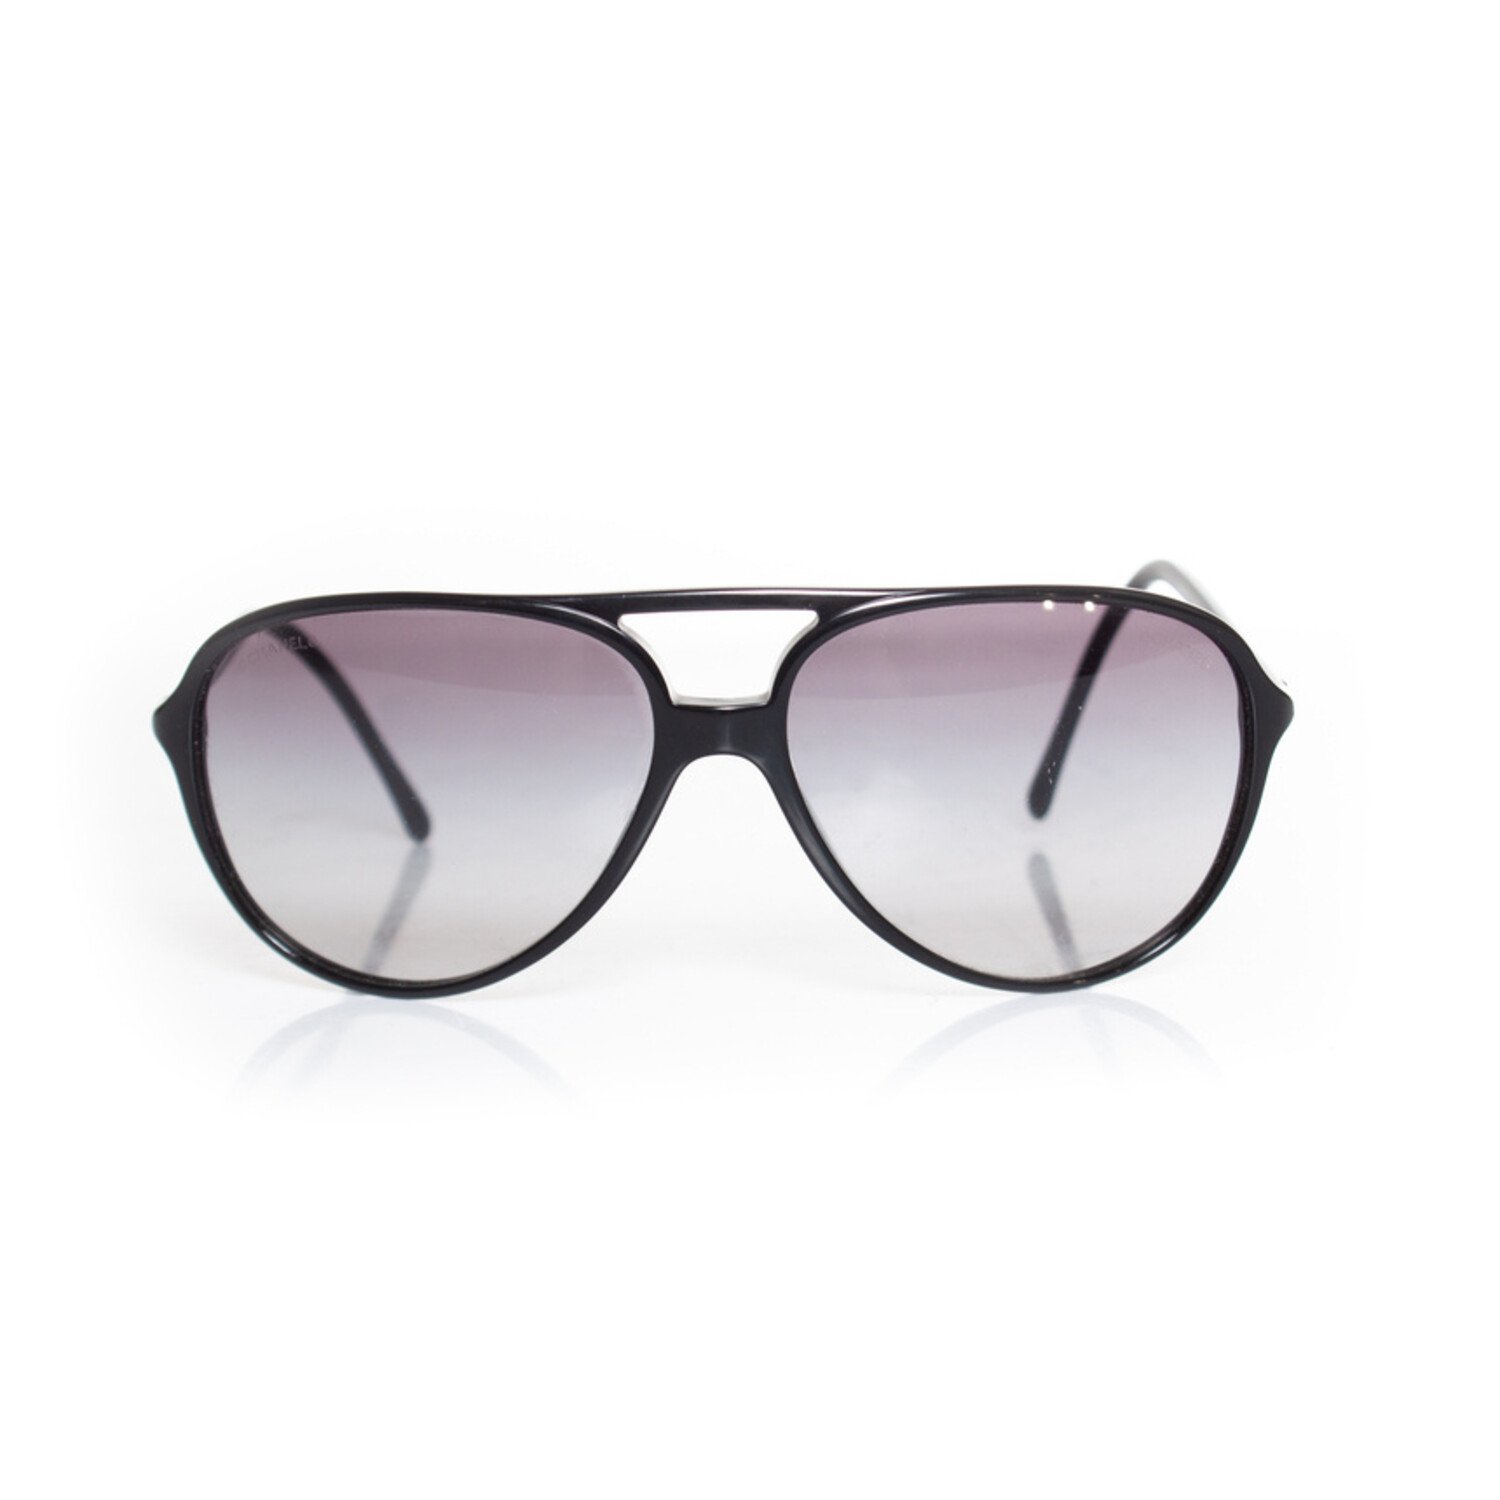 Aviator sunglasses Chanel Black in Not specified - 25259539